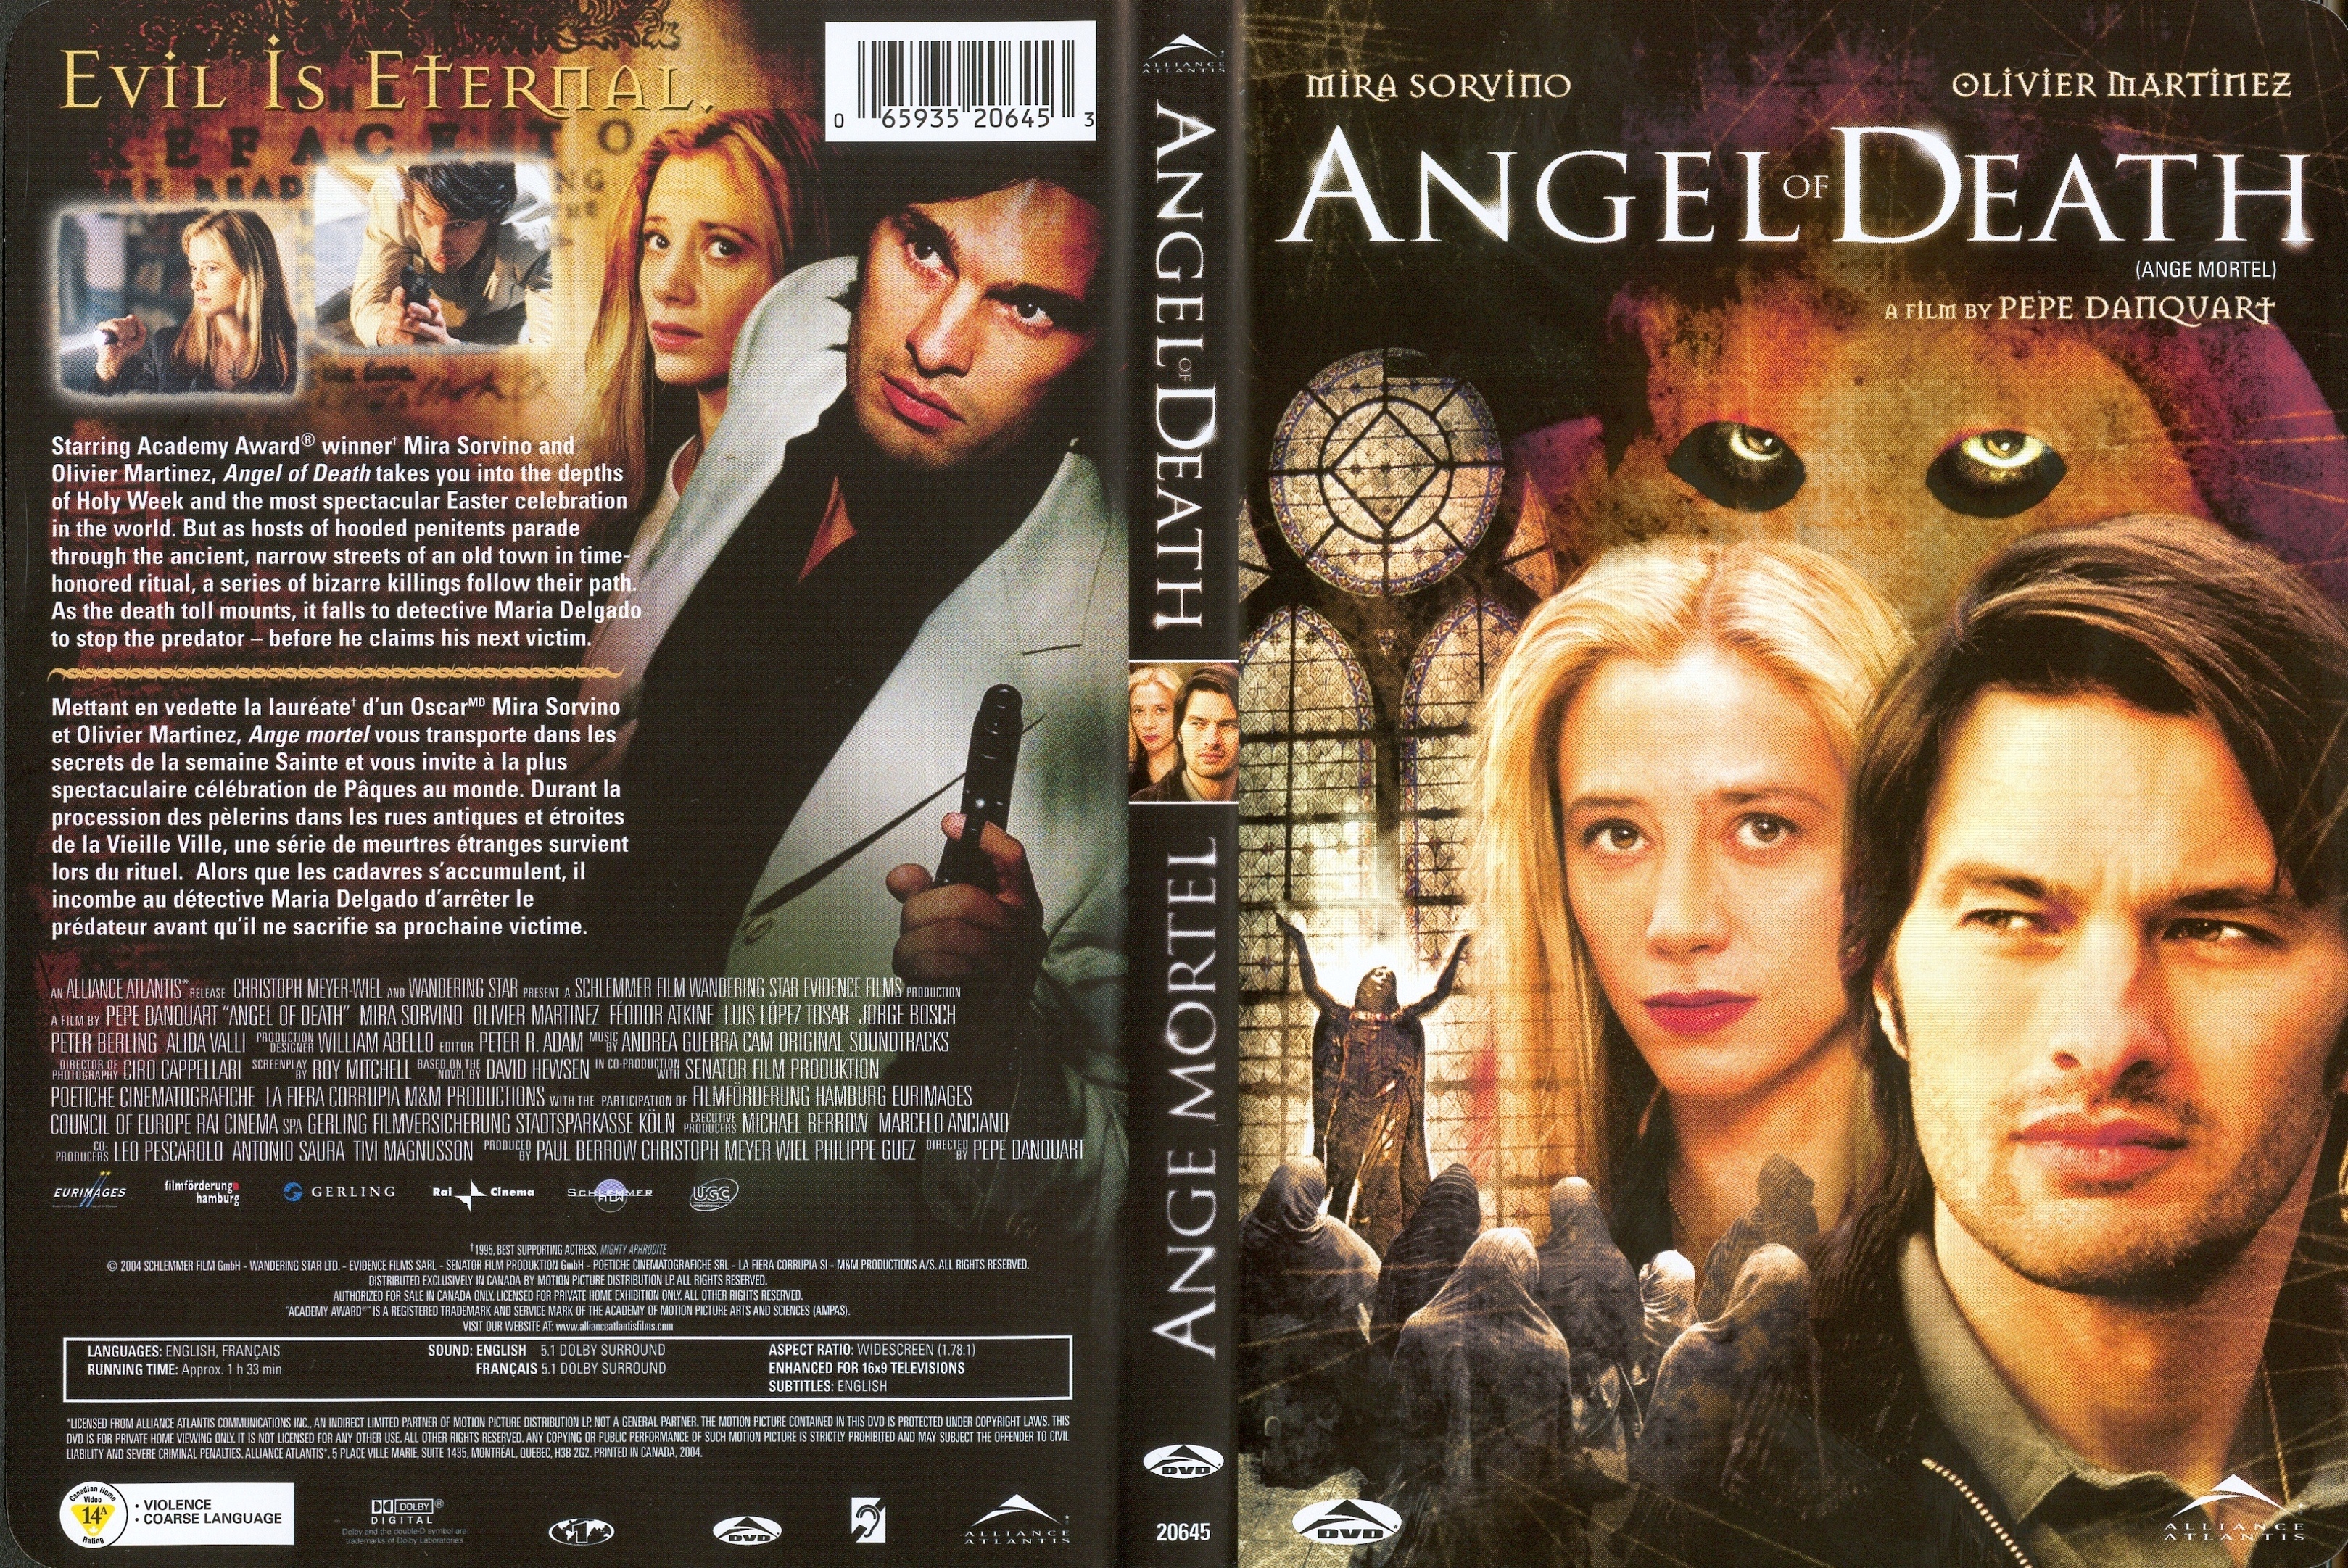 Jaquette DVD Angel of death